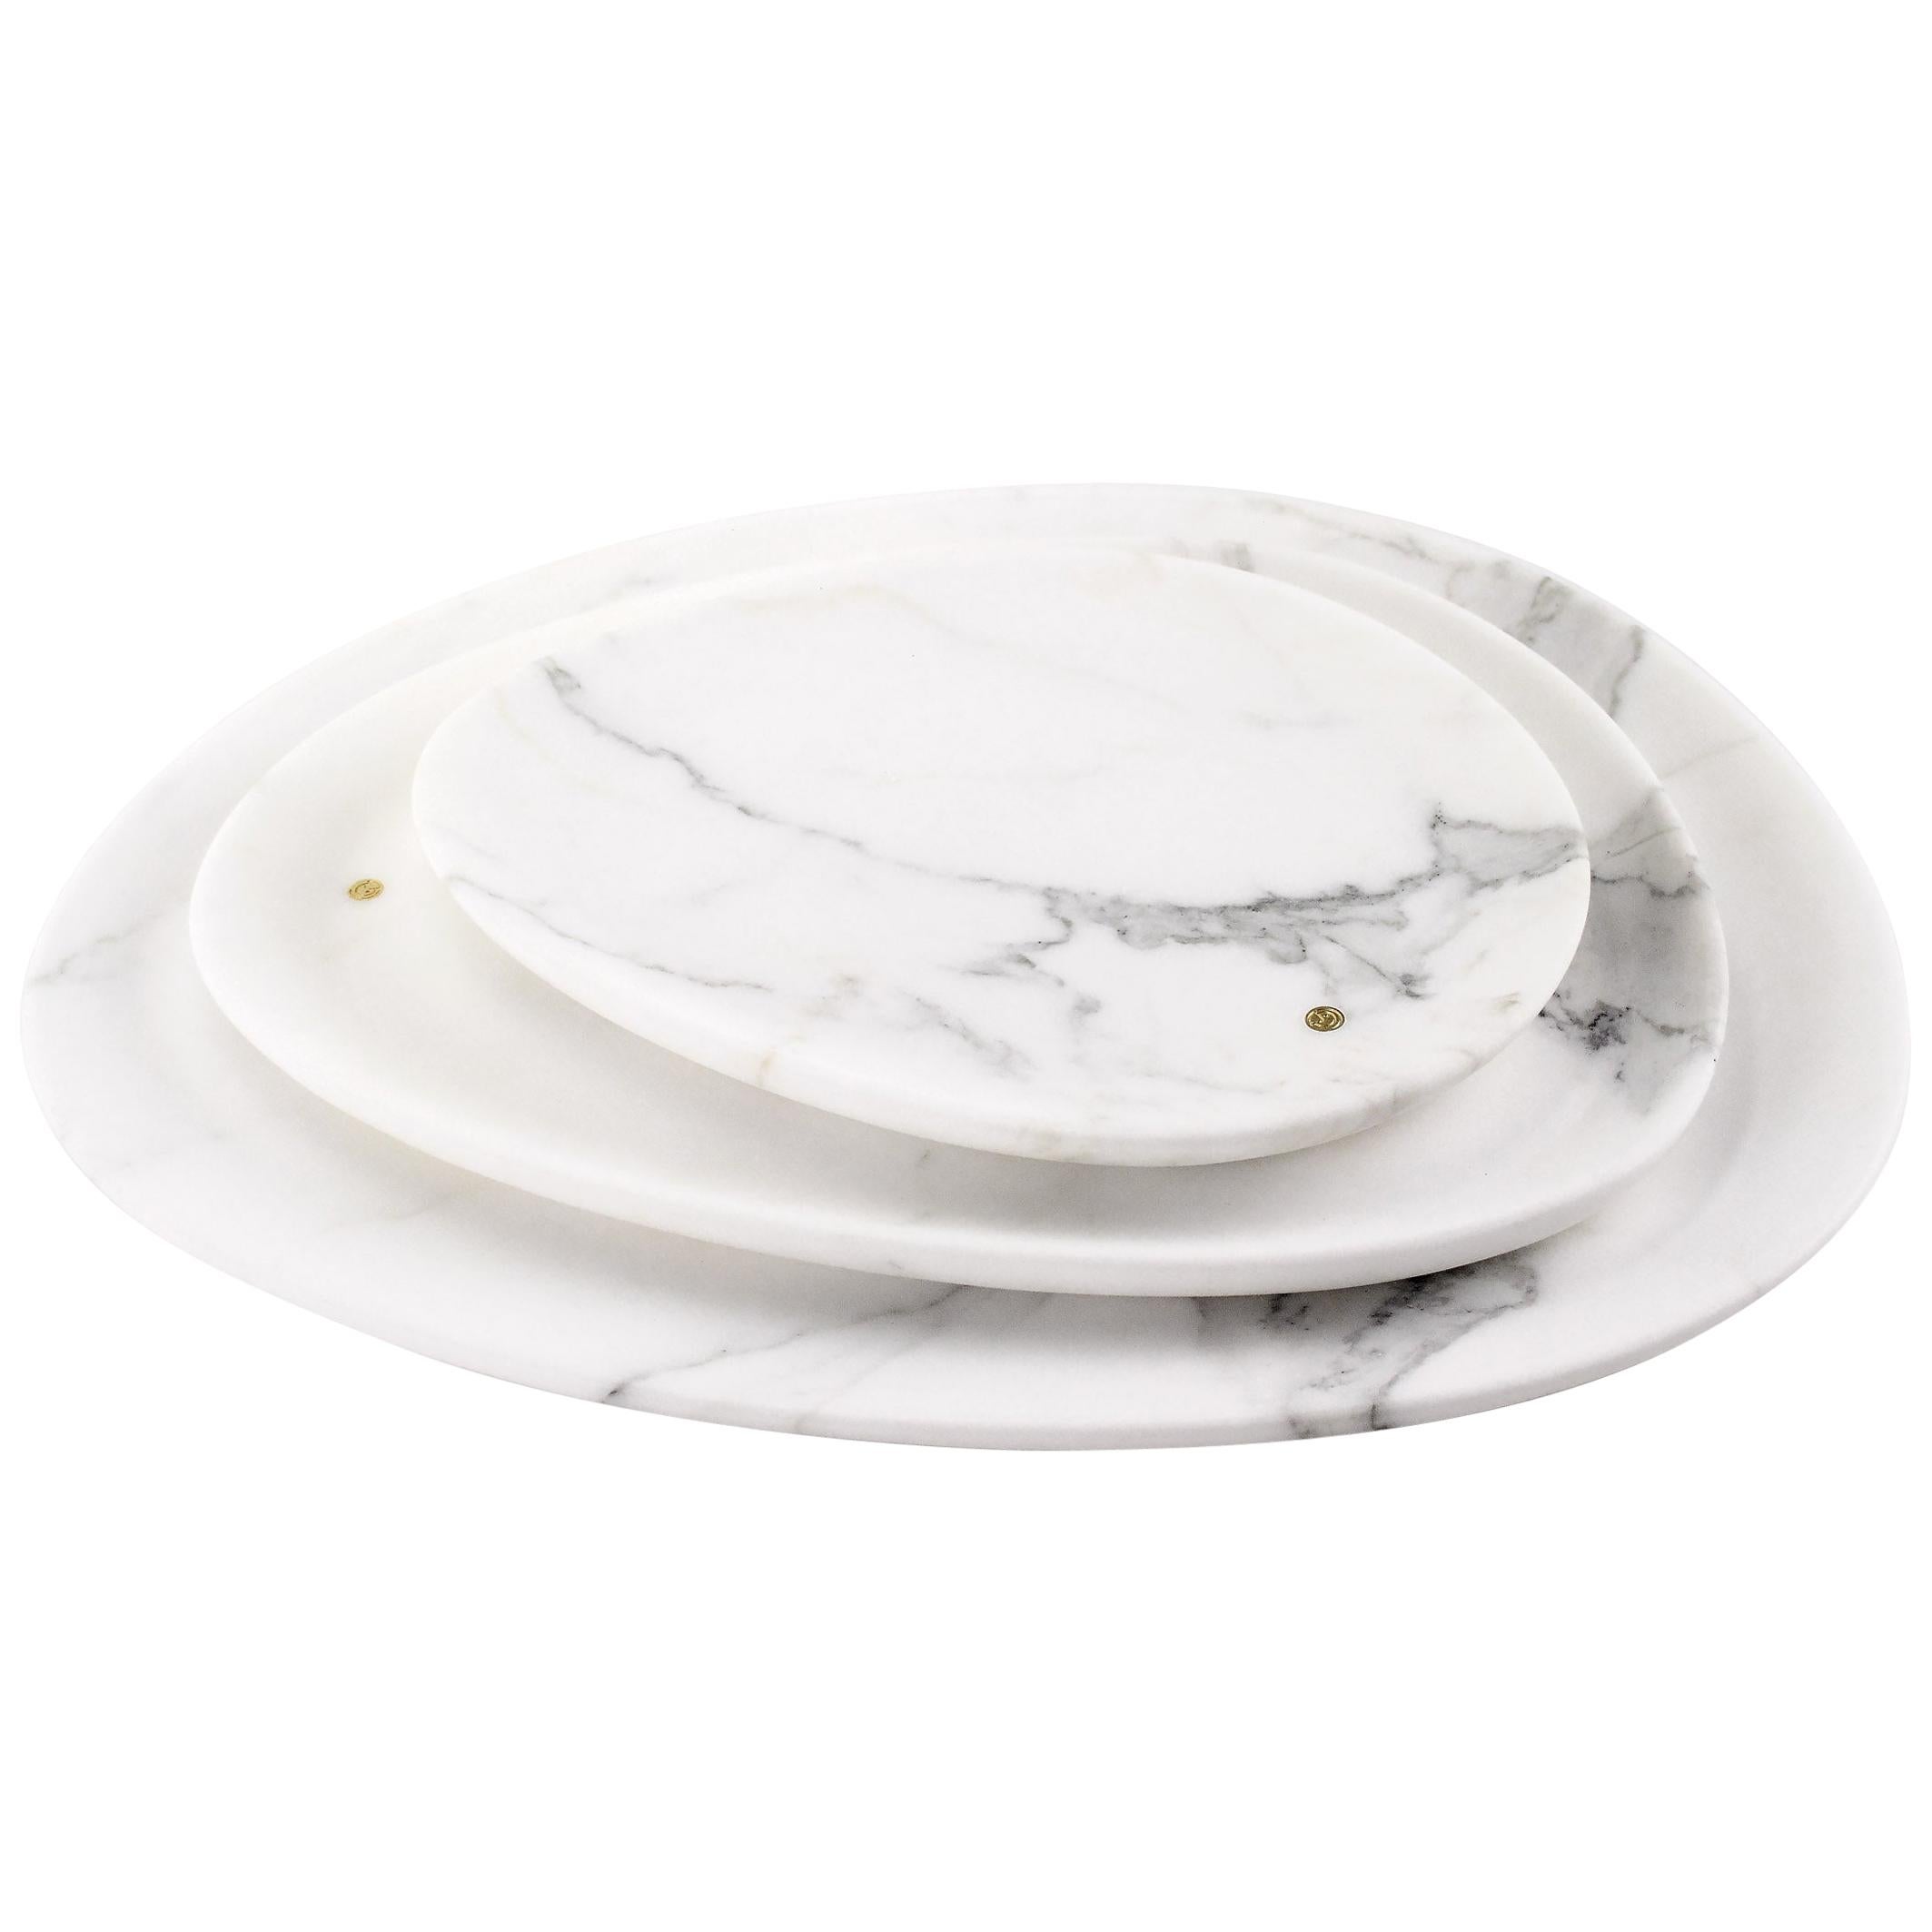 Plates Platters Serveware Set of 3 White Statuary Marble Collectible Design